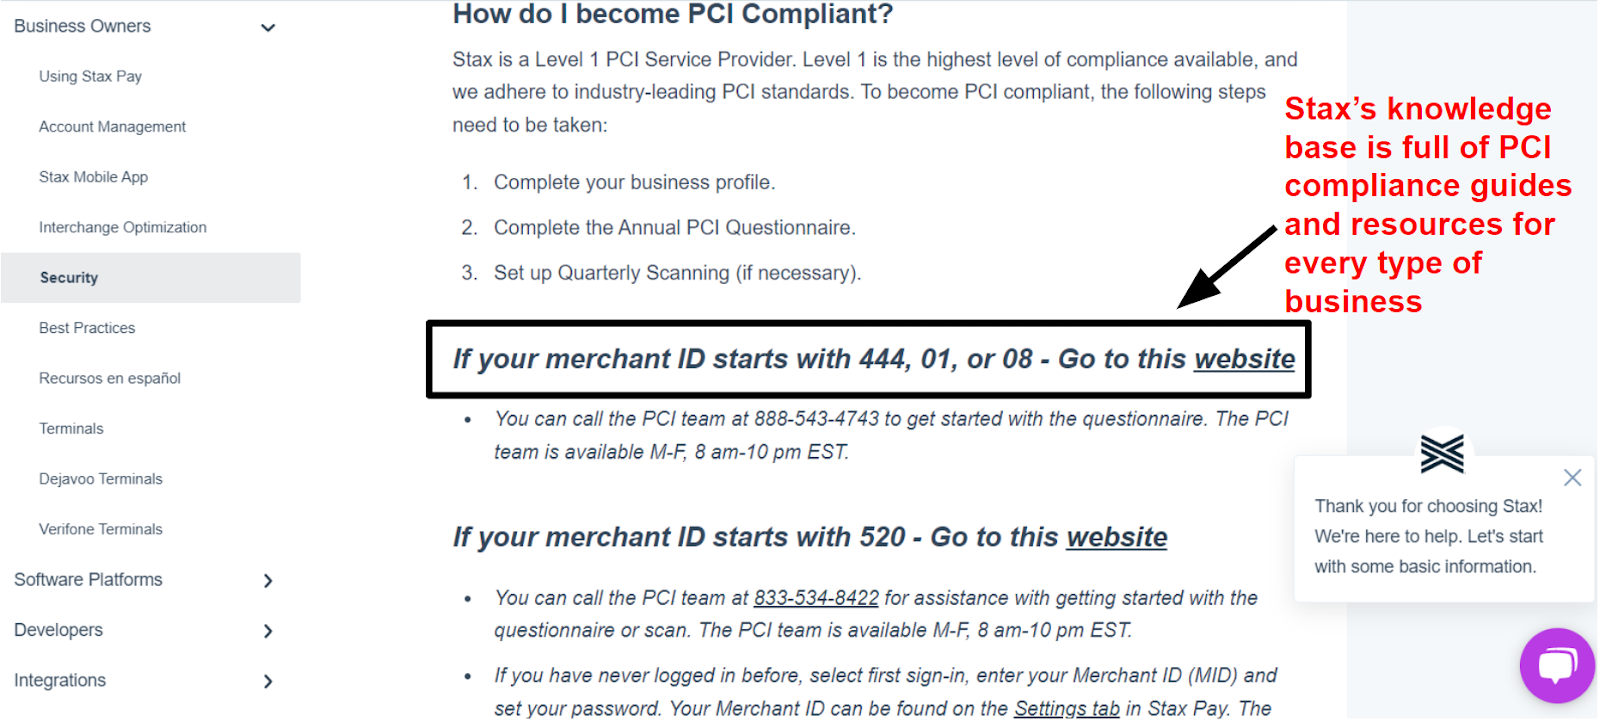 Stax's PCI compliance guide